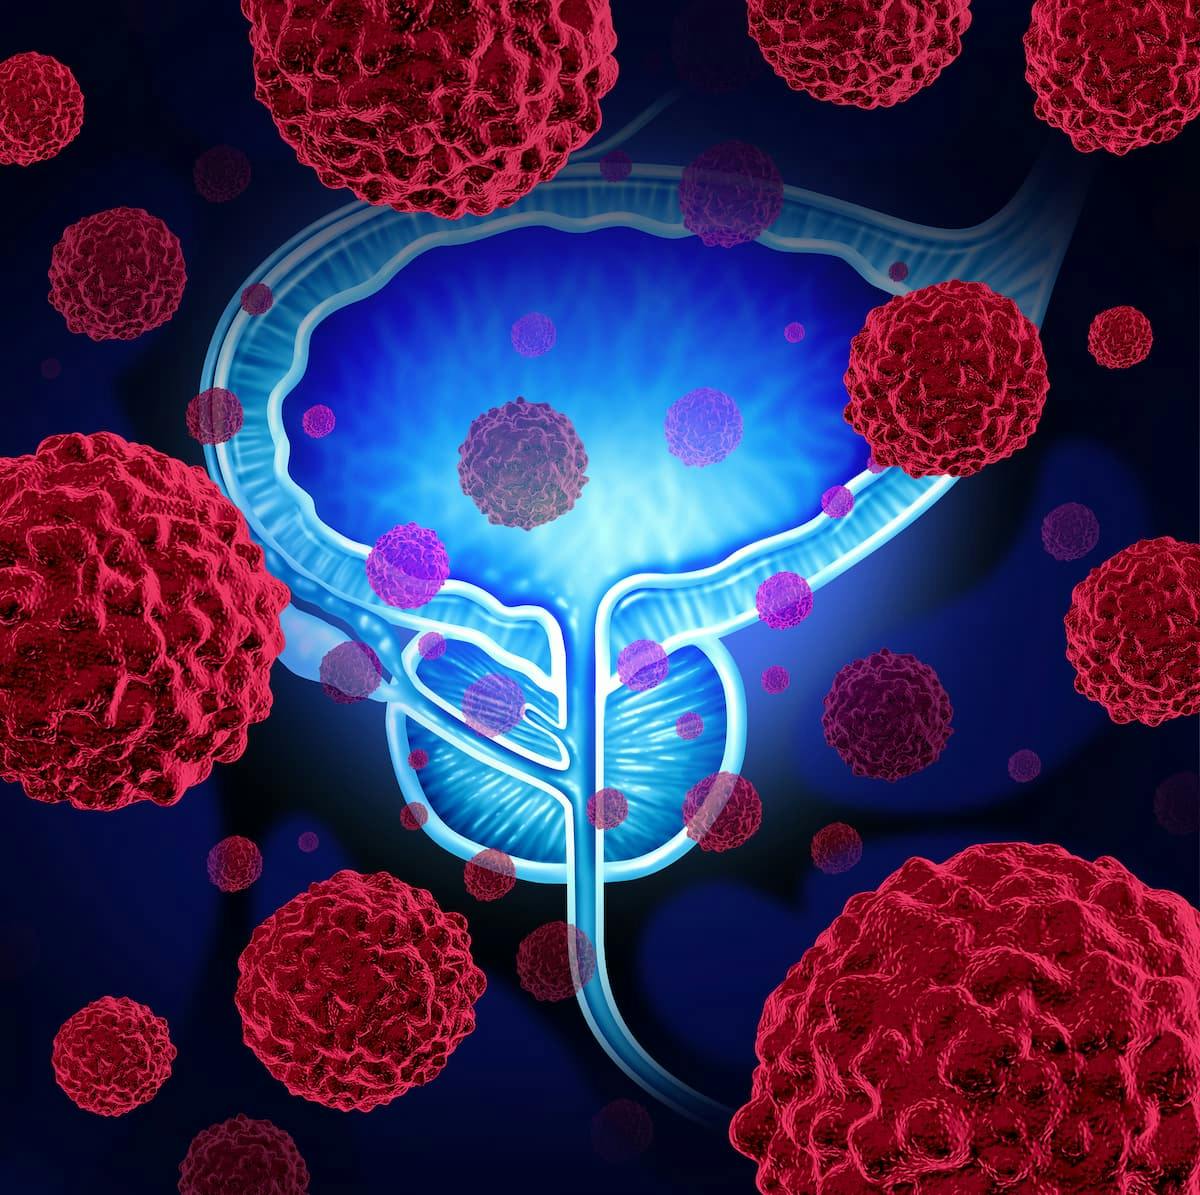 Rucaparib yields improved efficacy compared with docetaxel plus androgen receptor pathway inhibitors in metastatic castration-resistant prostate cancer harboring BRCA mutations.